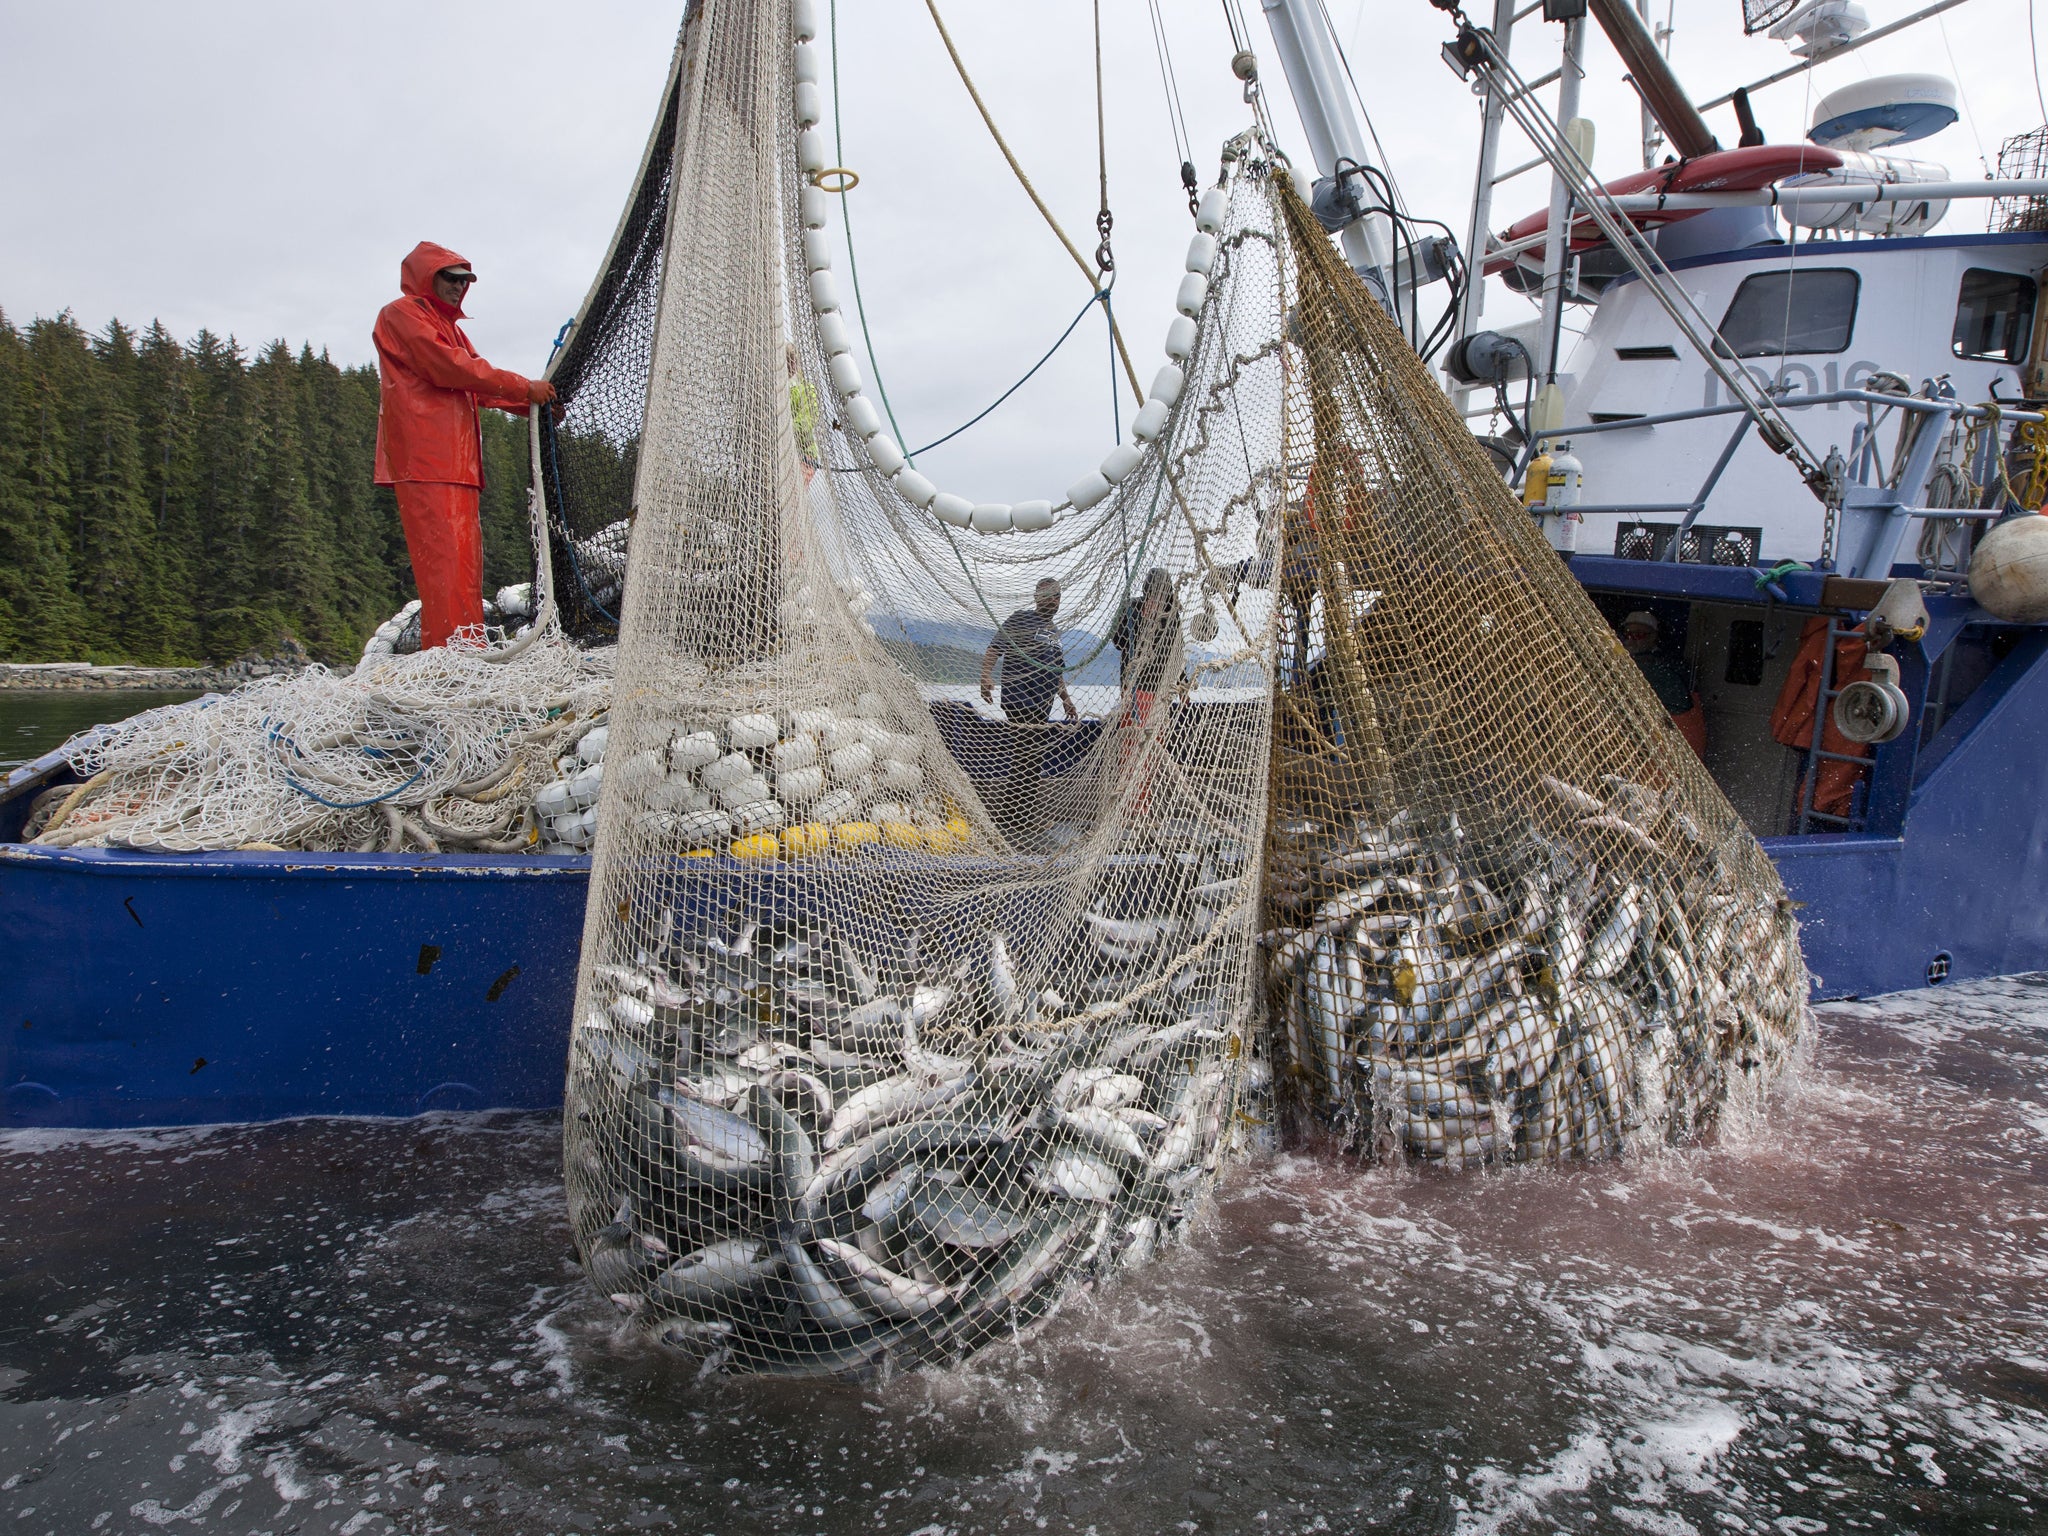 Tesco accused of 'hypocrisy' for stocking a cut-price brand of tuna caught using huge purse seine nets which can catch anything in their path